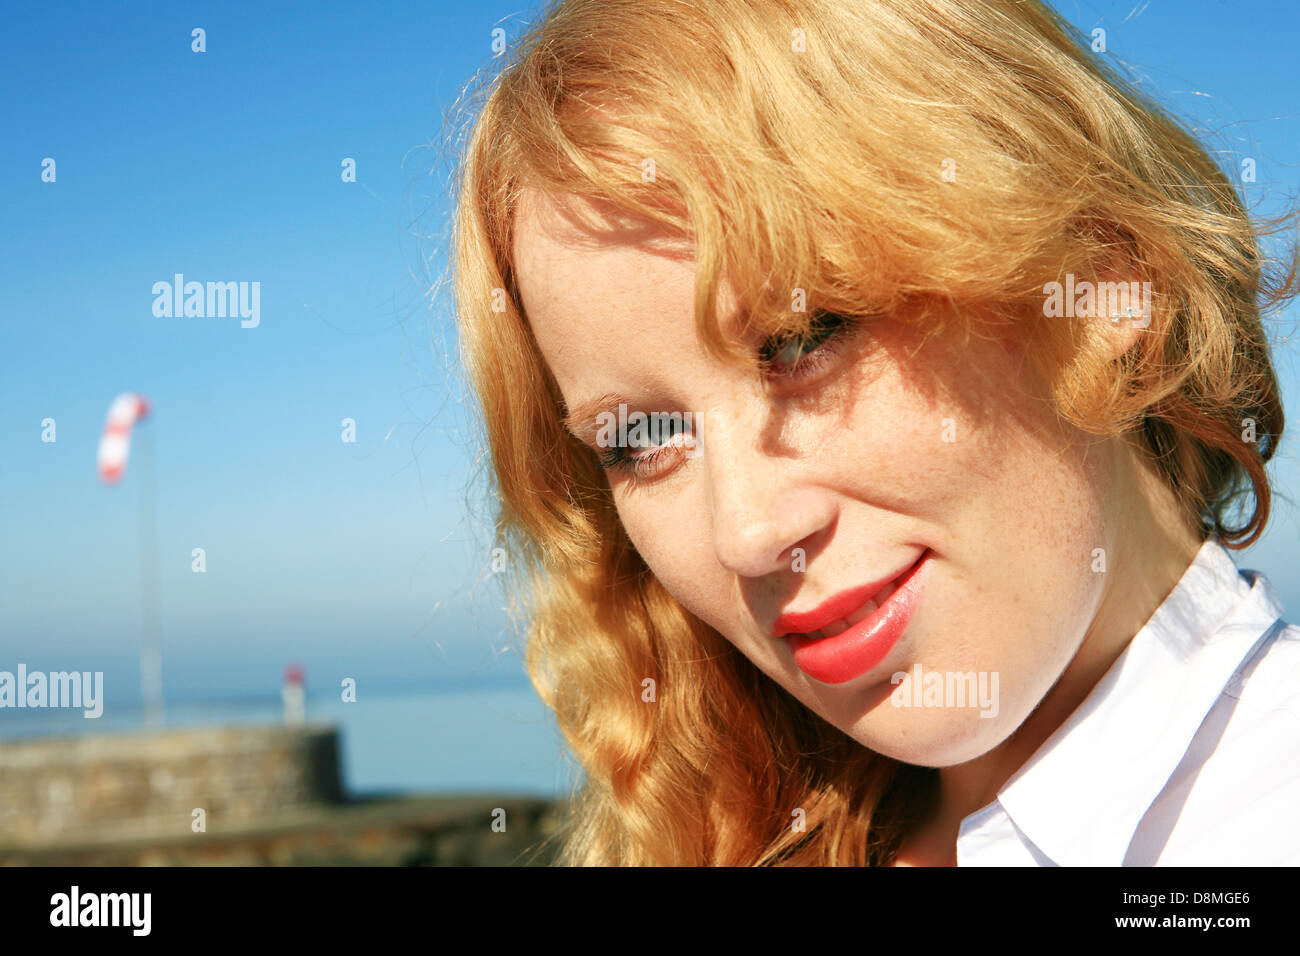 yound redheaded woman Stock Photo